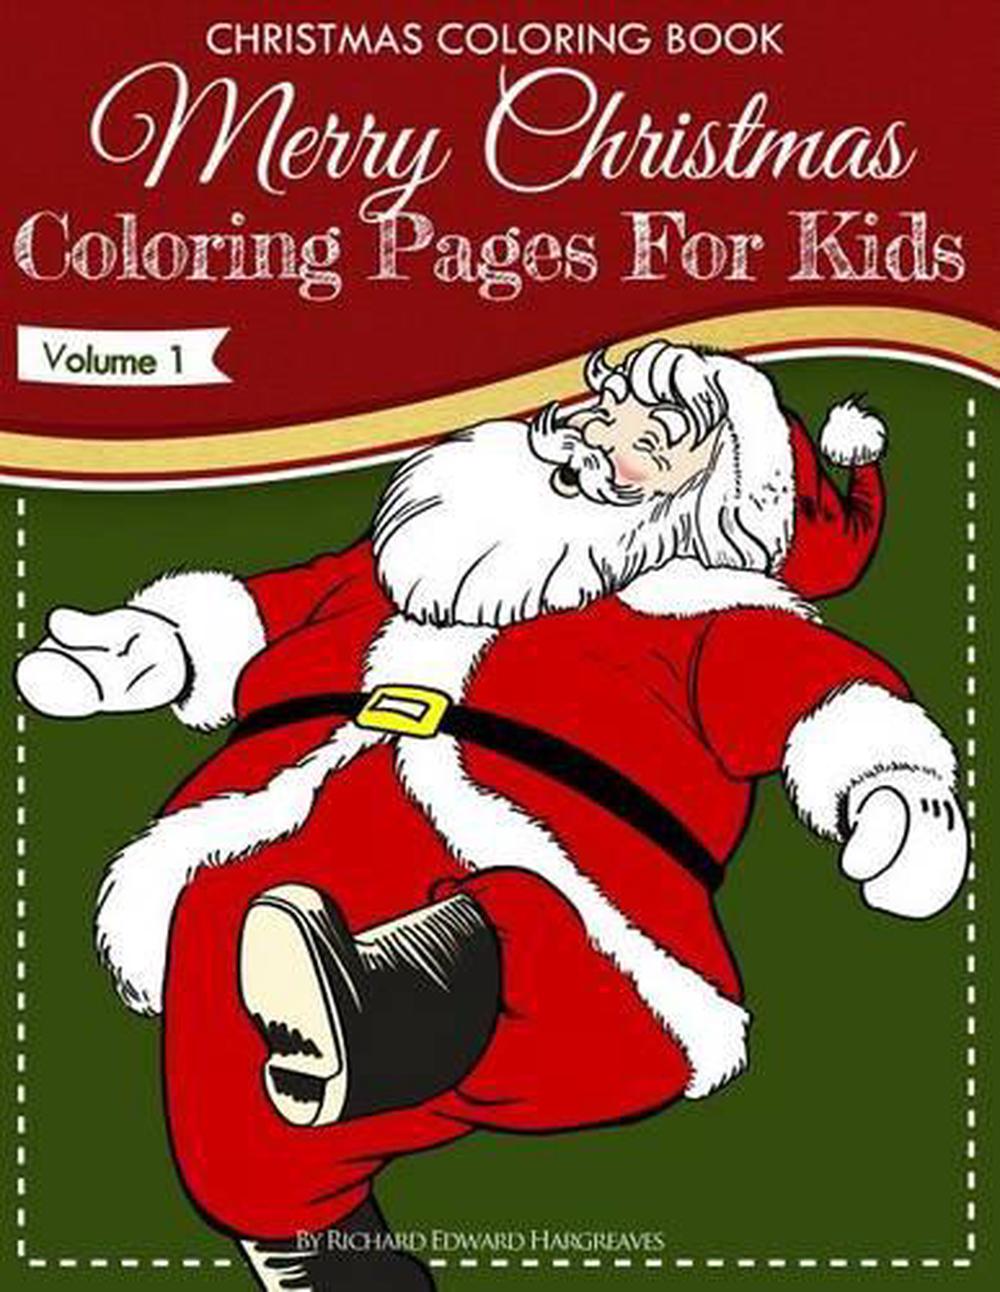 Download Christmas Coloring Book - Merry Christmas Coloring Pages ...